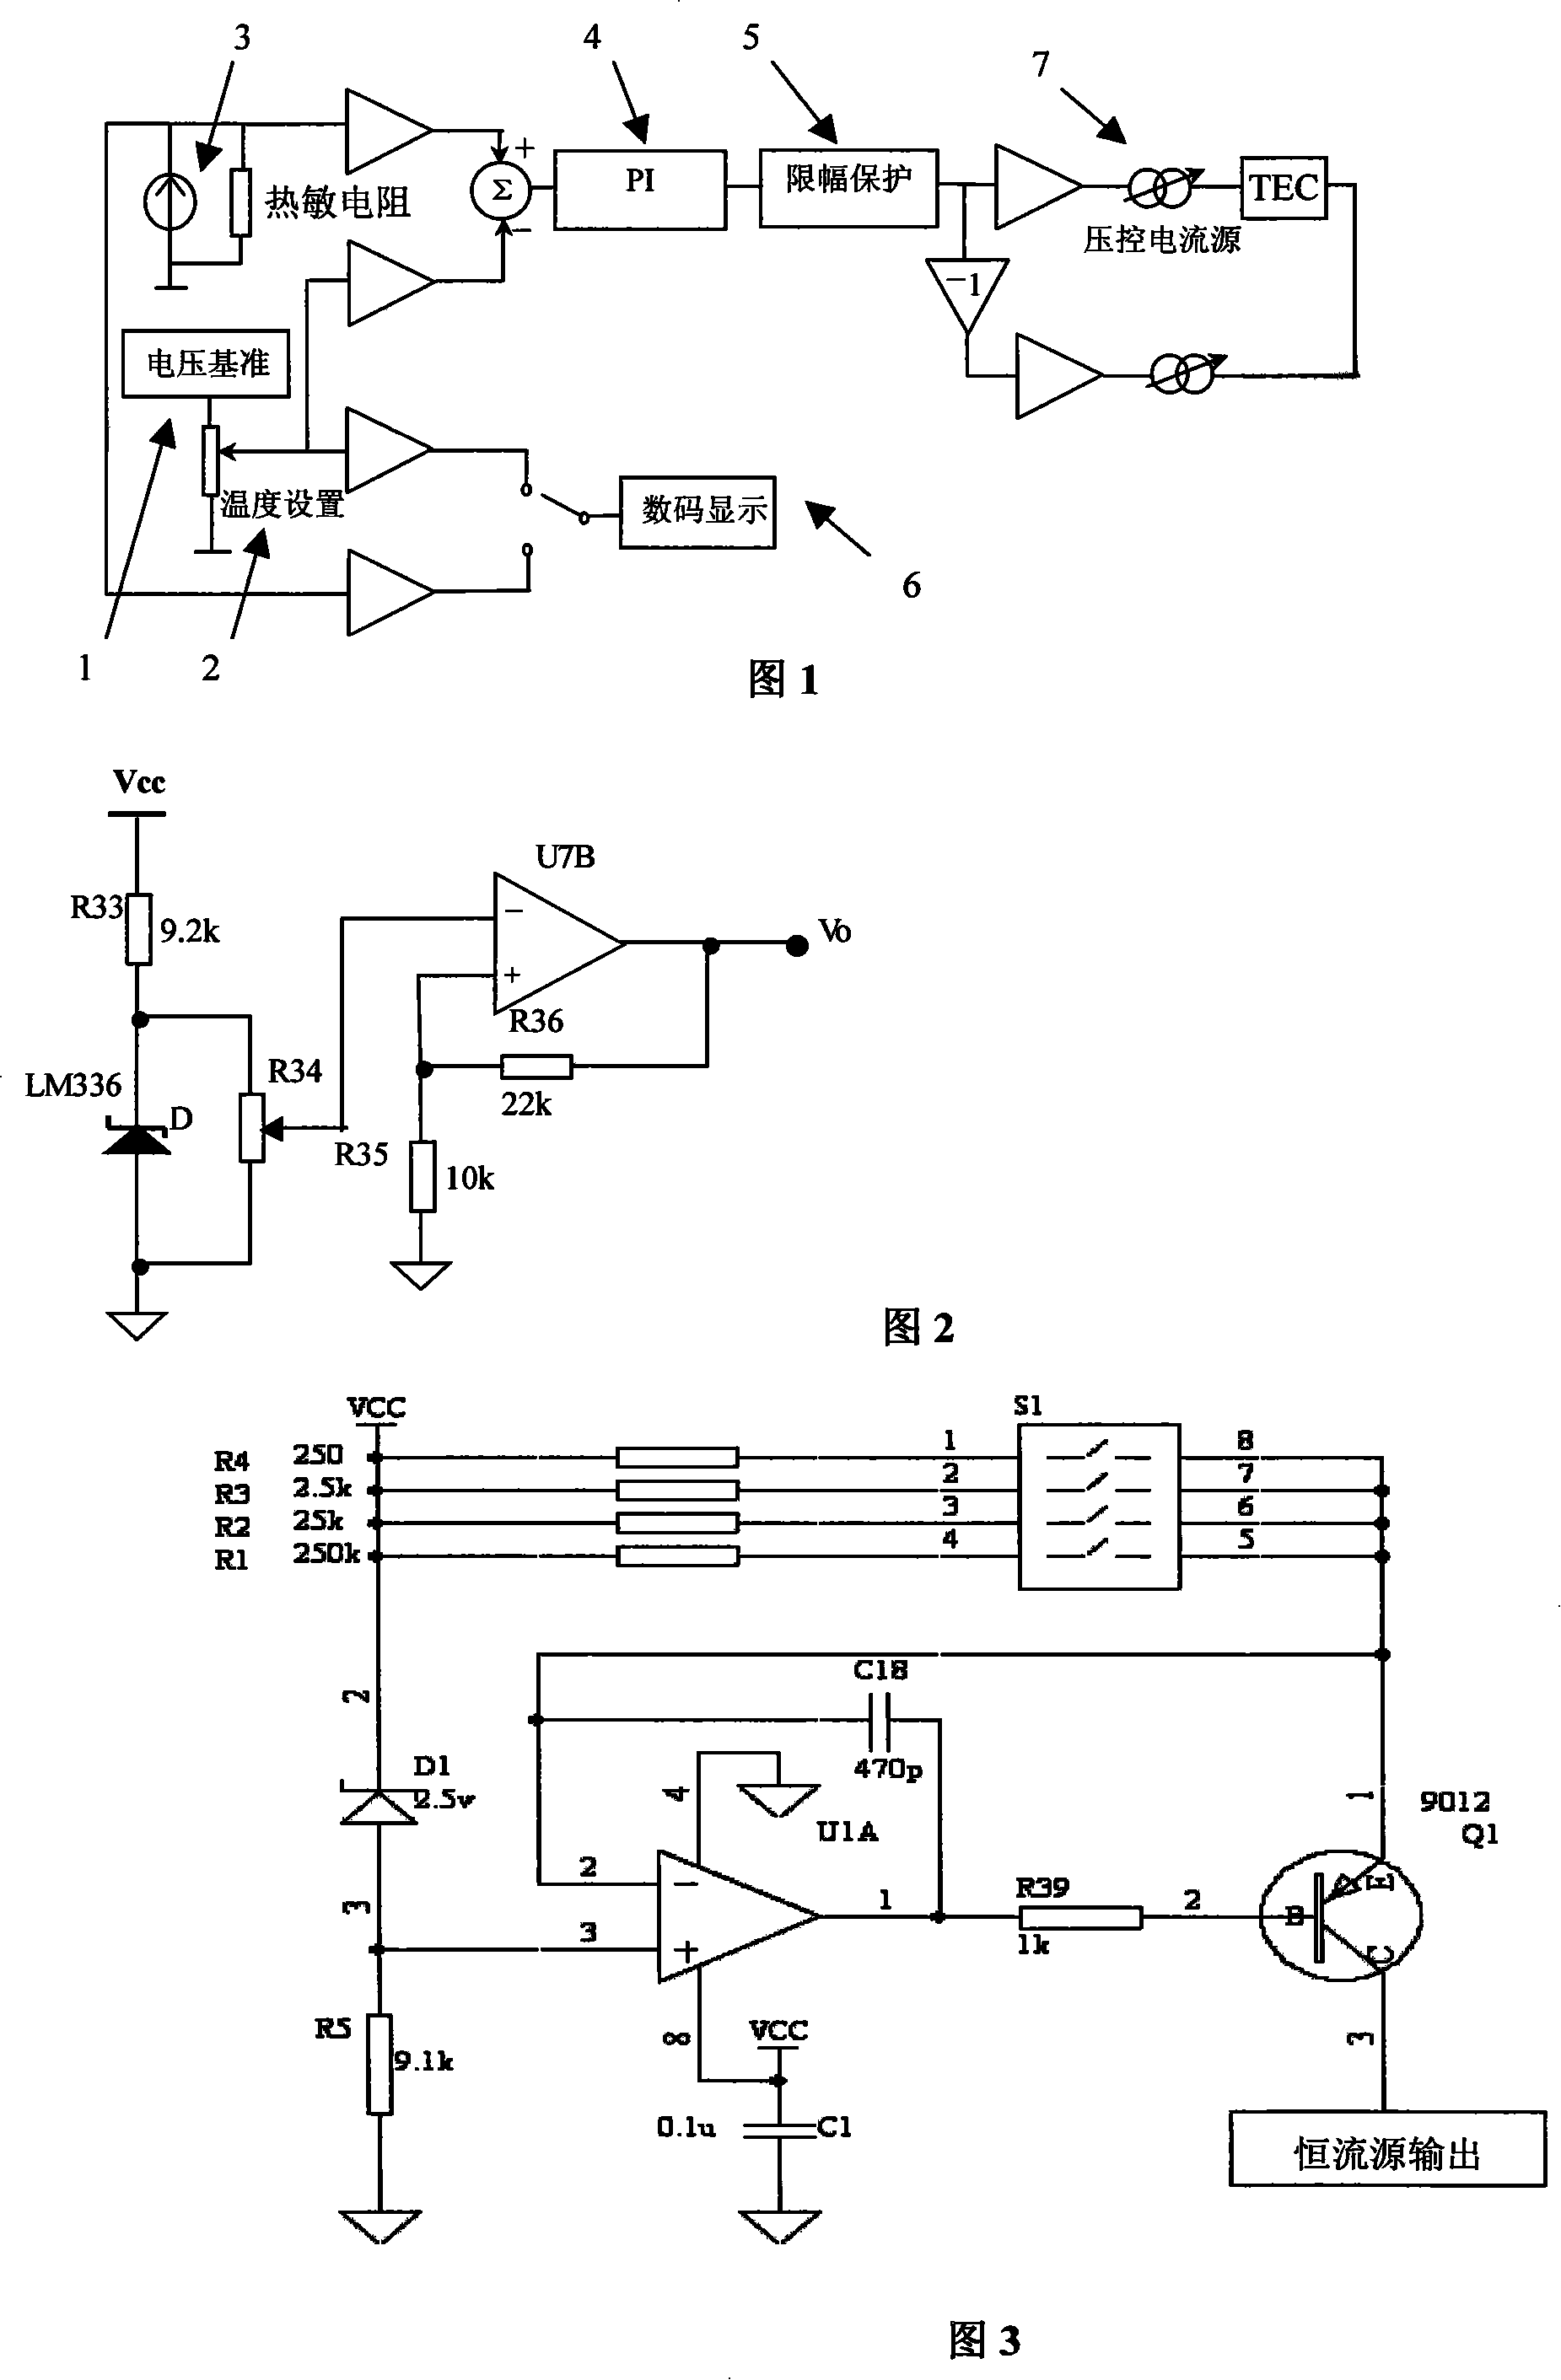 High-stability thermostatic controller